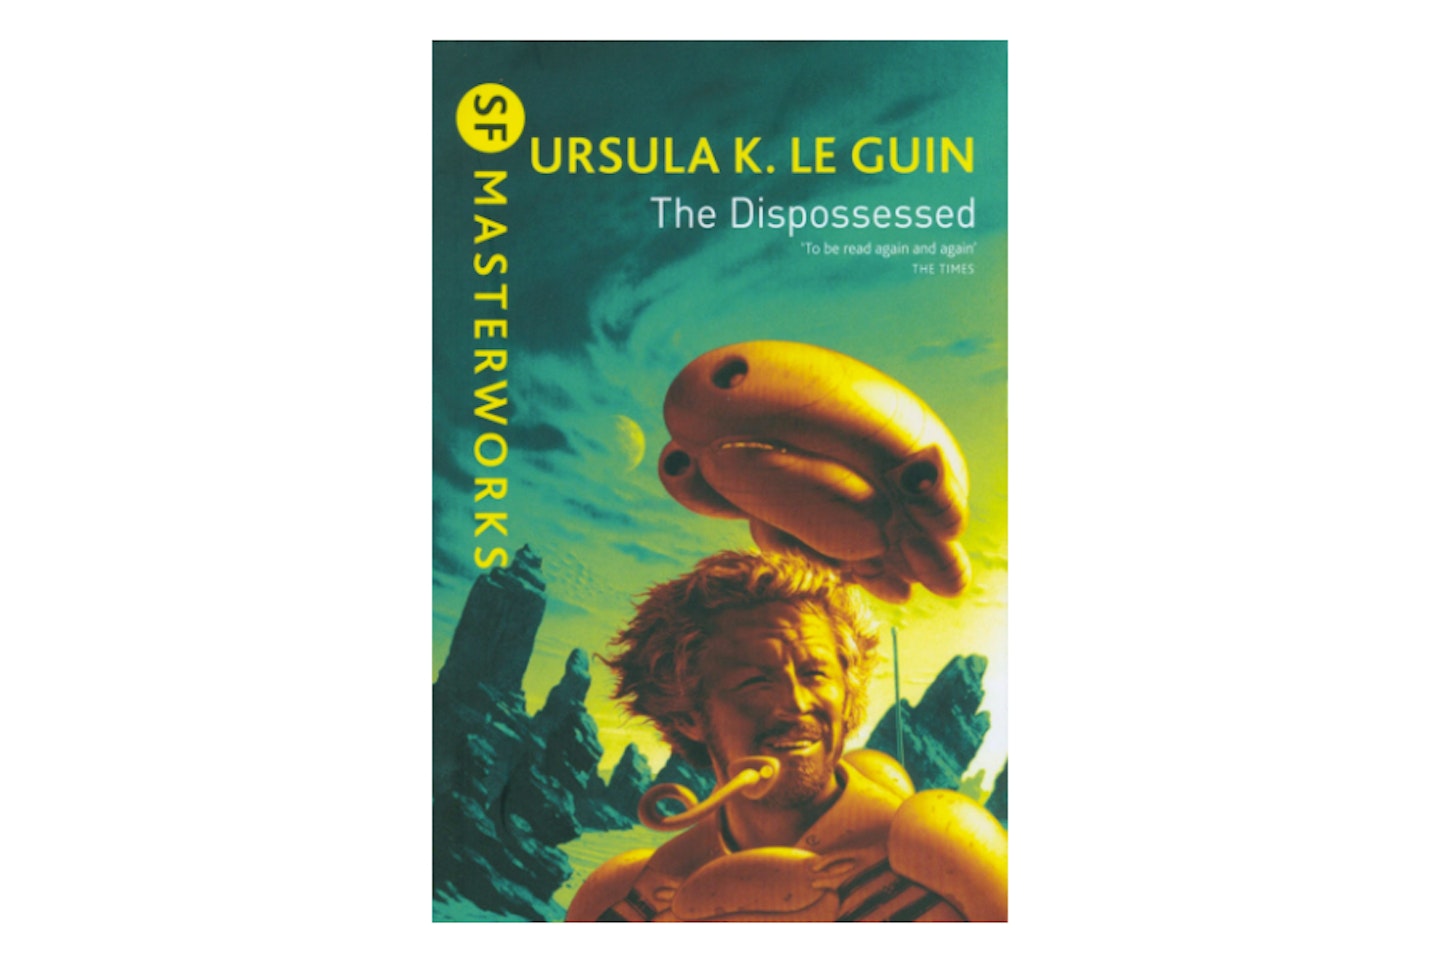 The Dispossessed: An Ambiguous Utopia by Ursula Le Guin, 1974